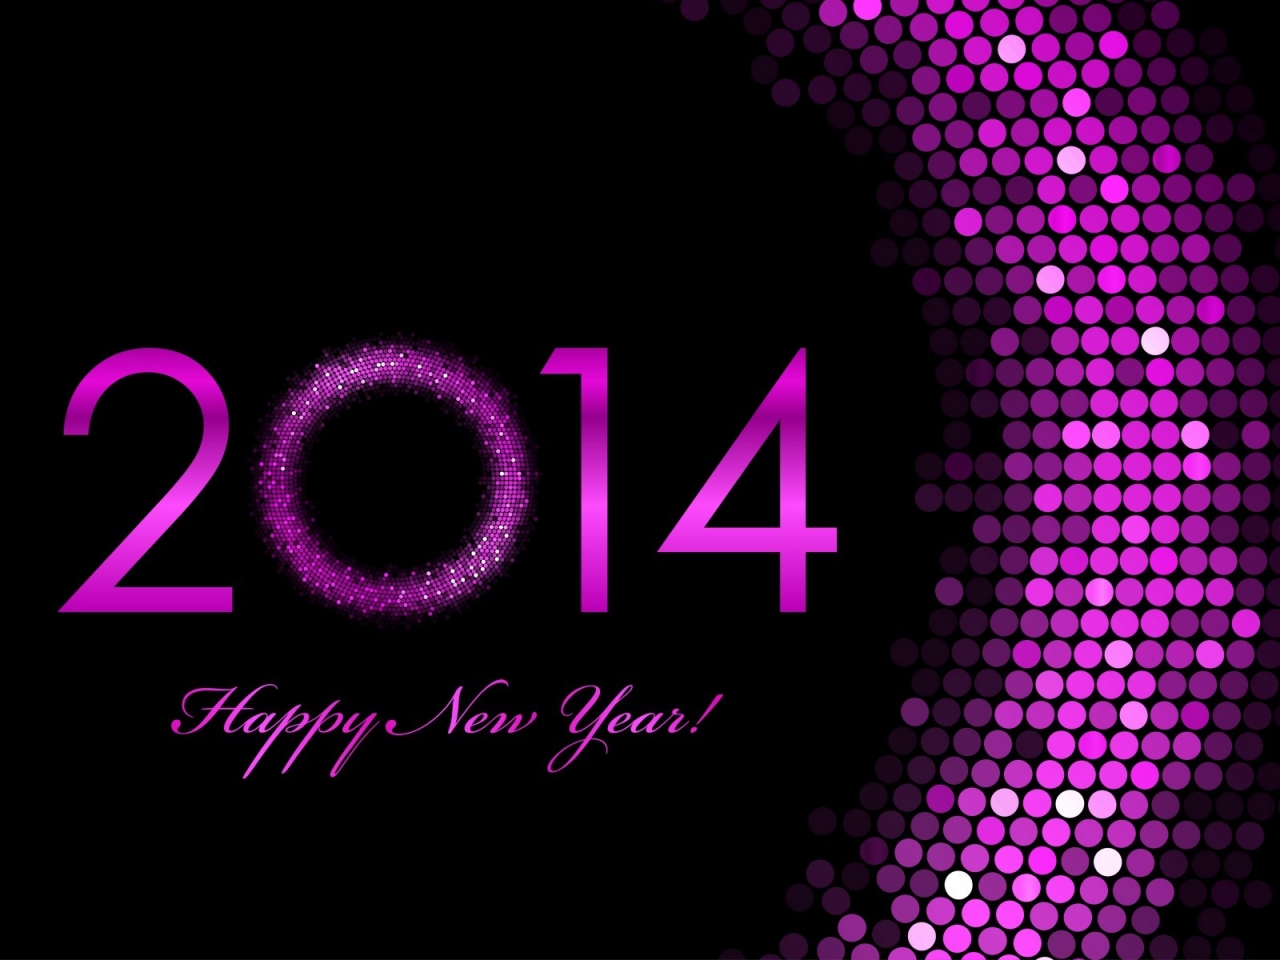 2014 Happy New Year for 1280 x 960 resolution